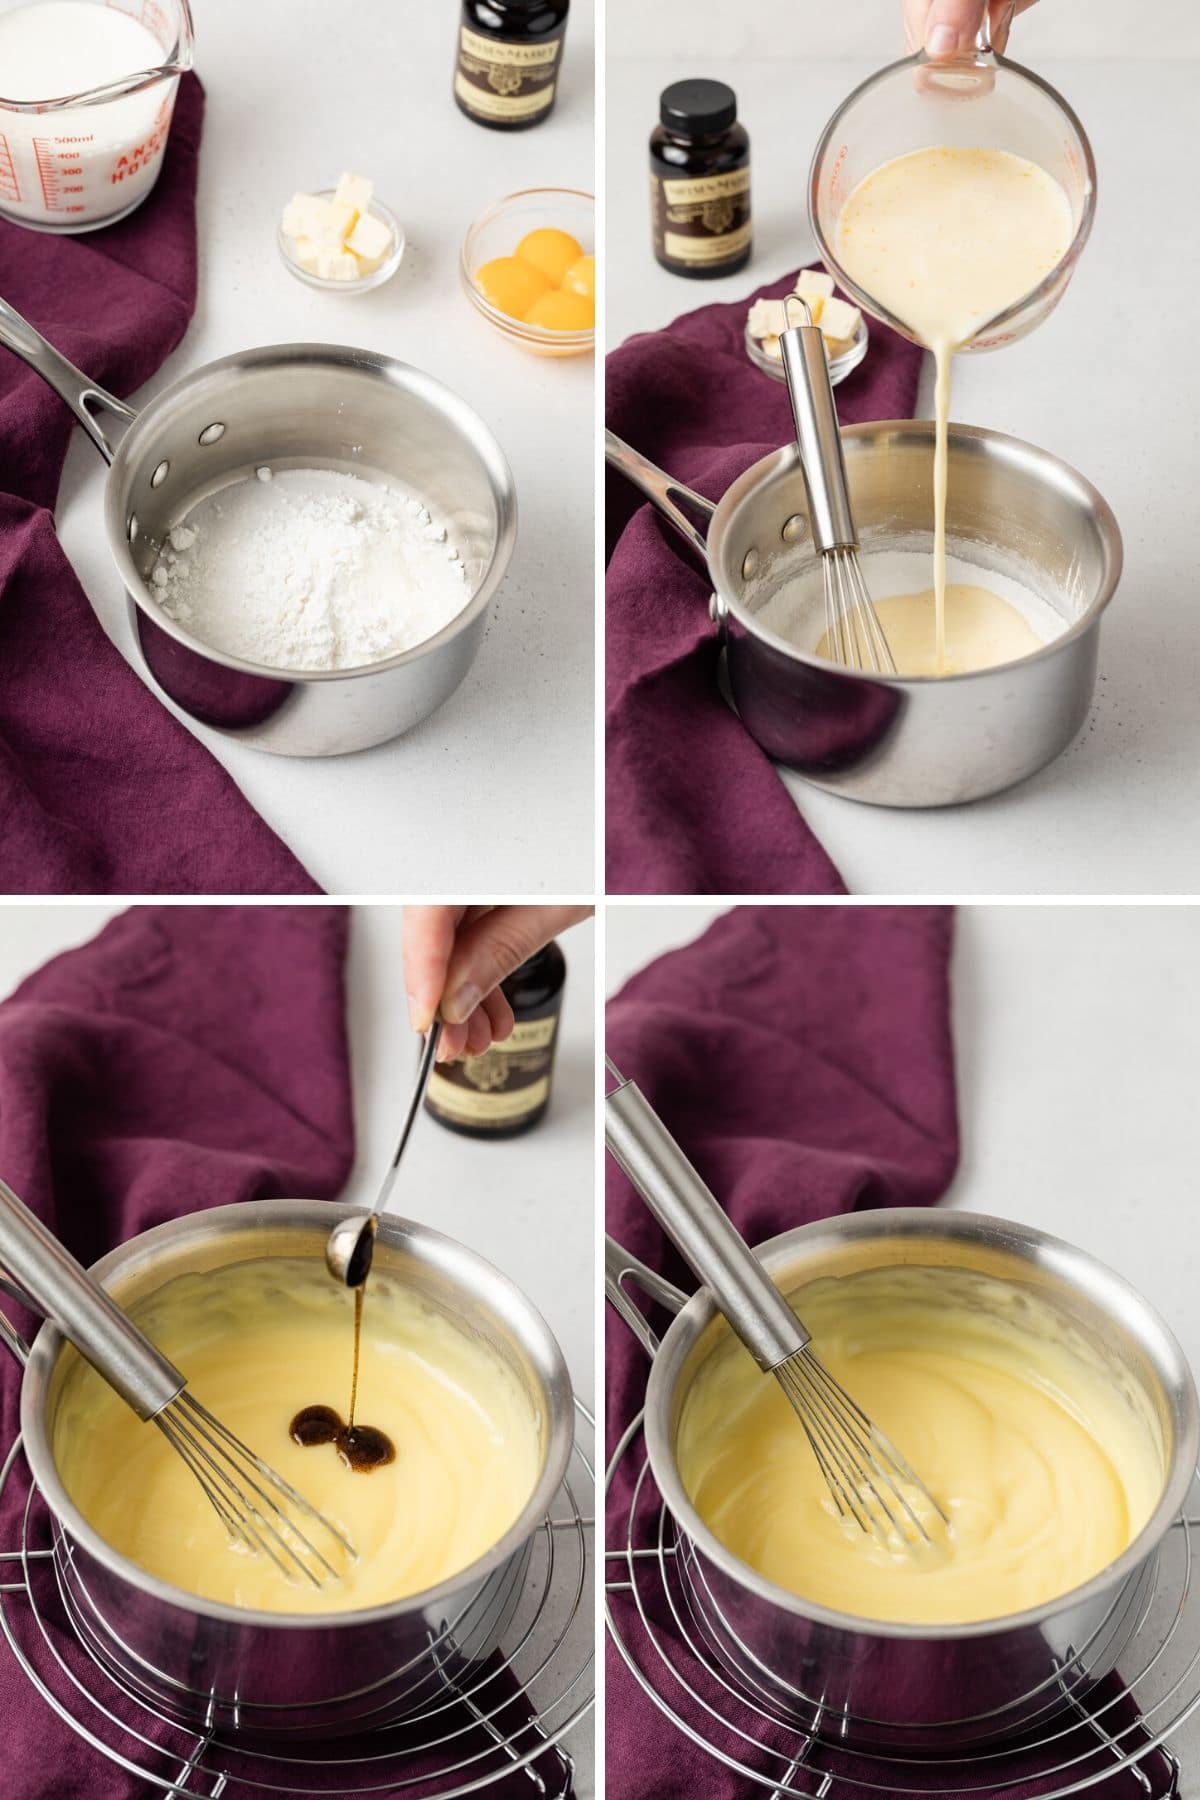 Process shots showing how to make creme patissiere.